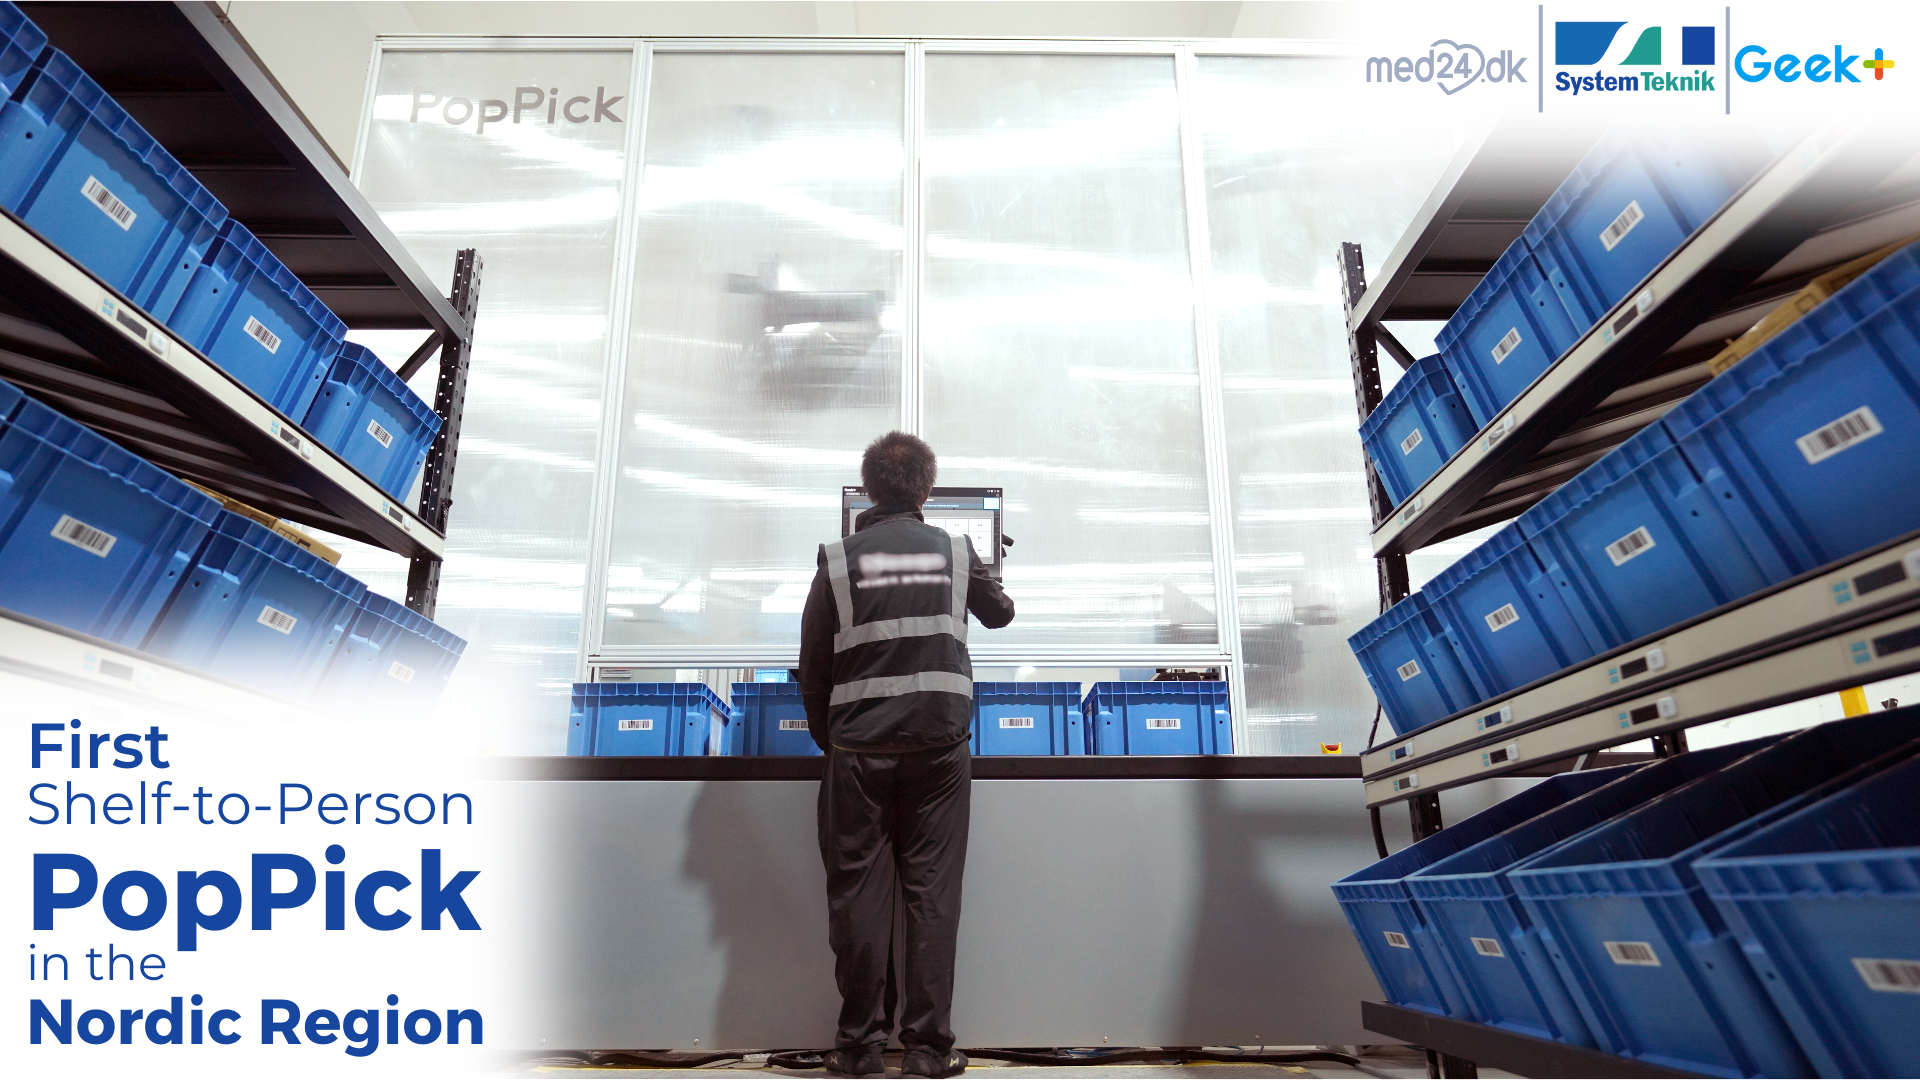 Geek+ and System Teknik deploy first PopPick solution in the Nordics for Med24.dk